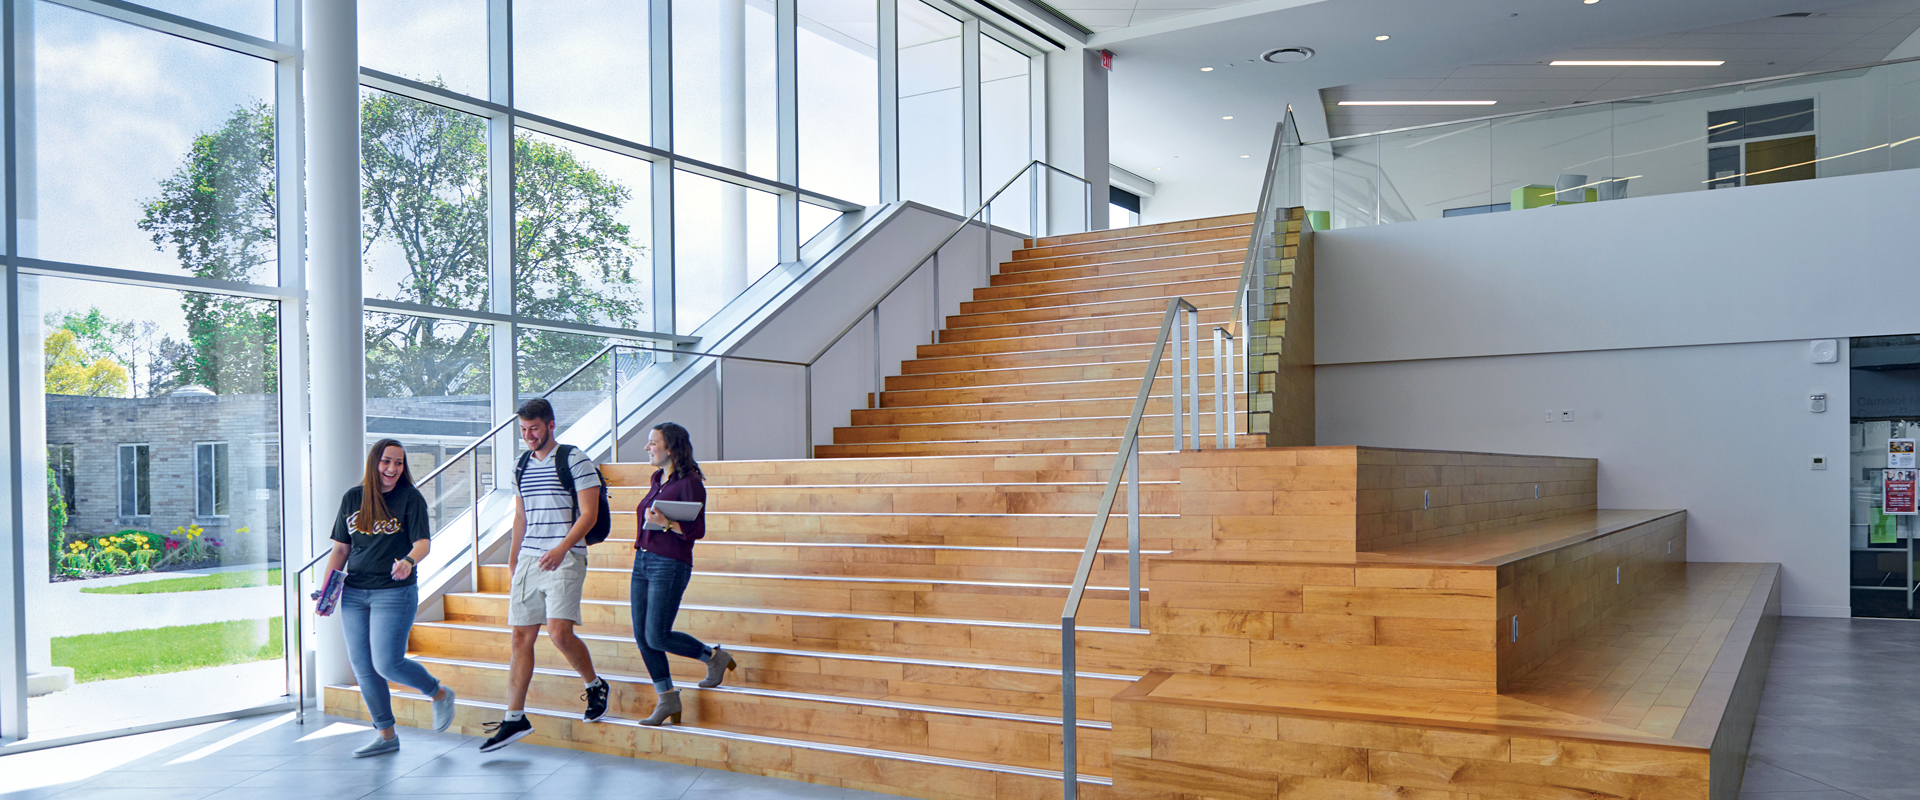 photo of a group of students walking down a staircase